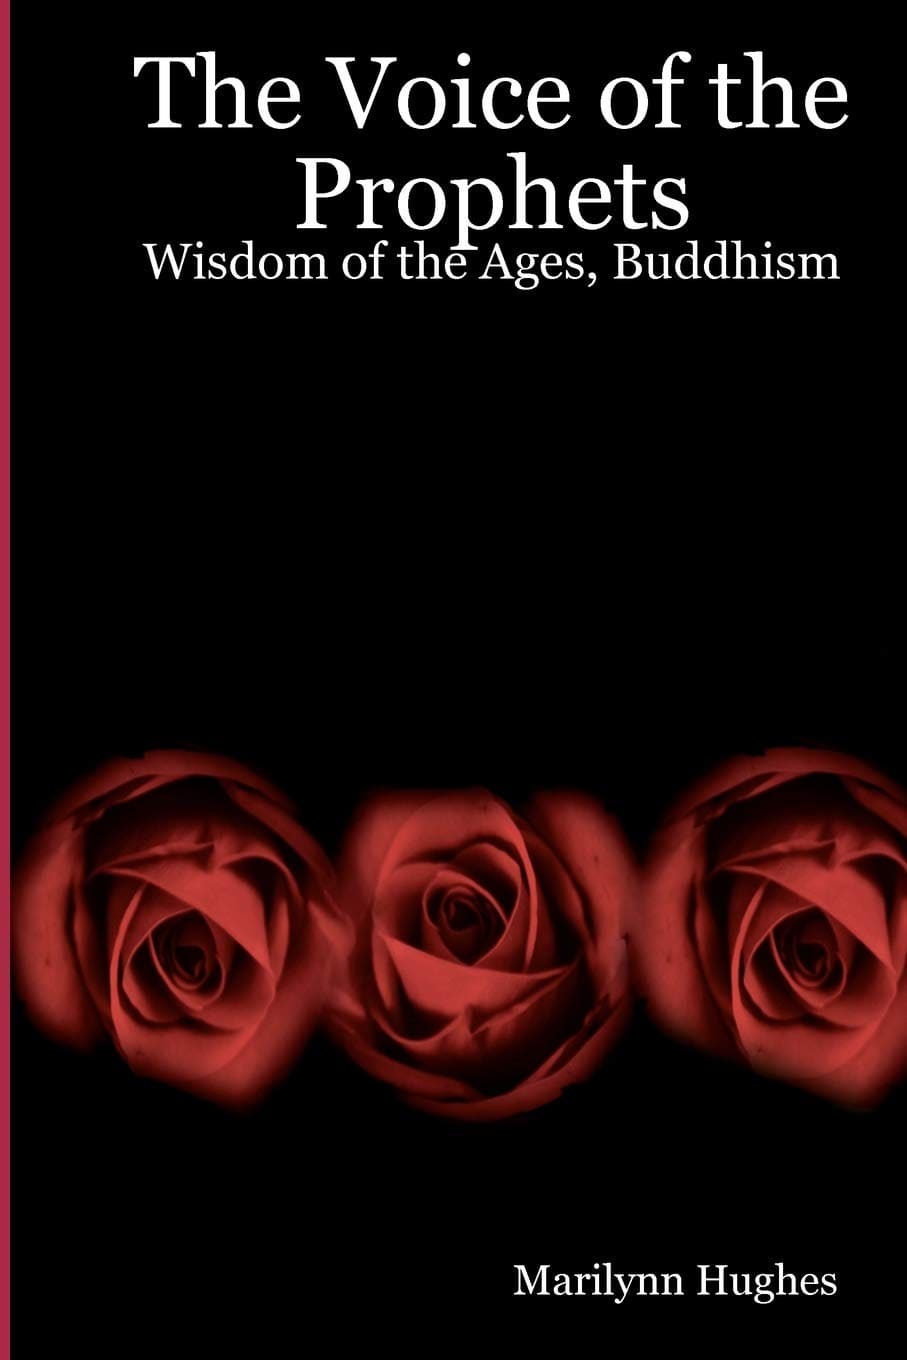 The Voice of the Prophets, Buddhism, By Marilynn Hughes - An Encyclopedia of Ancient Sacred Texts in Twelve Volumes - An Out-of-Body Travel Book